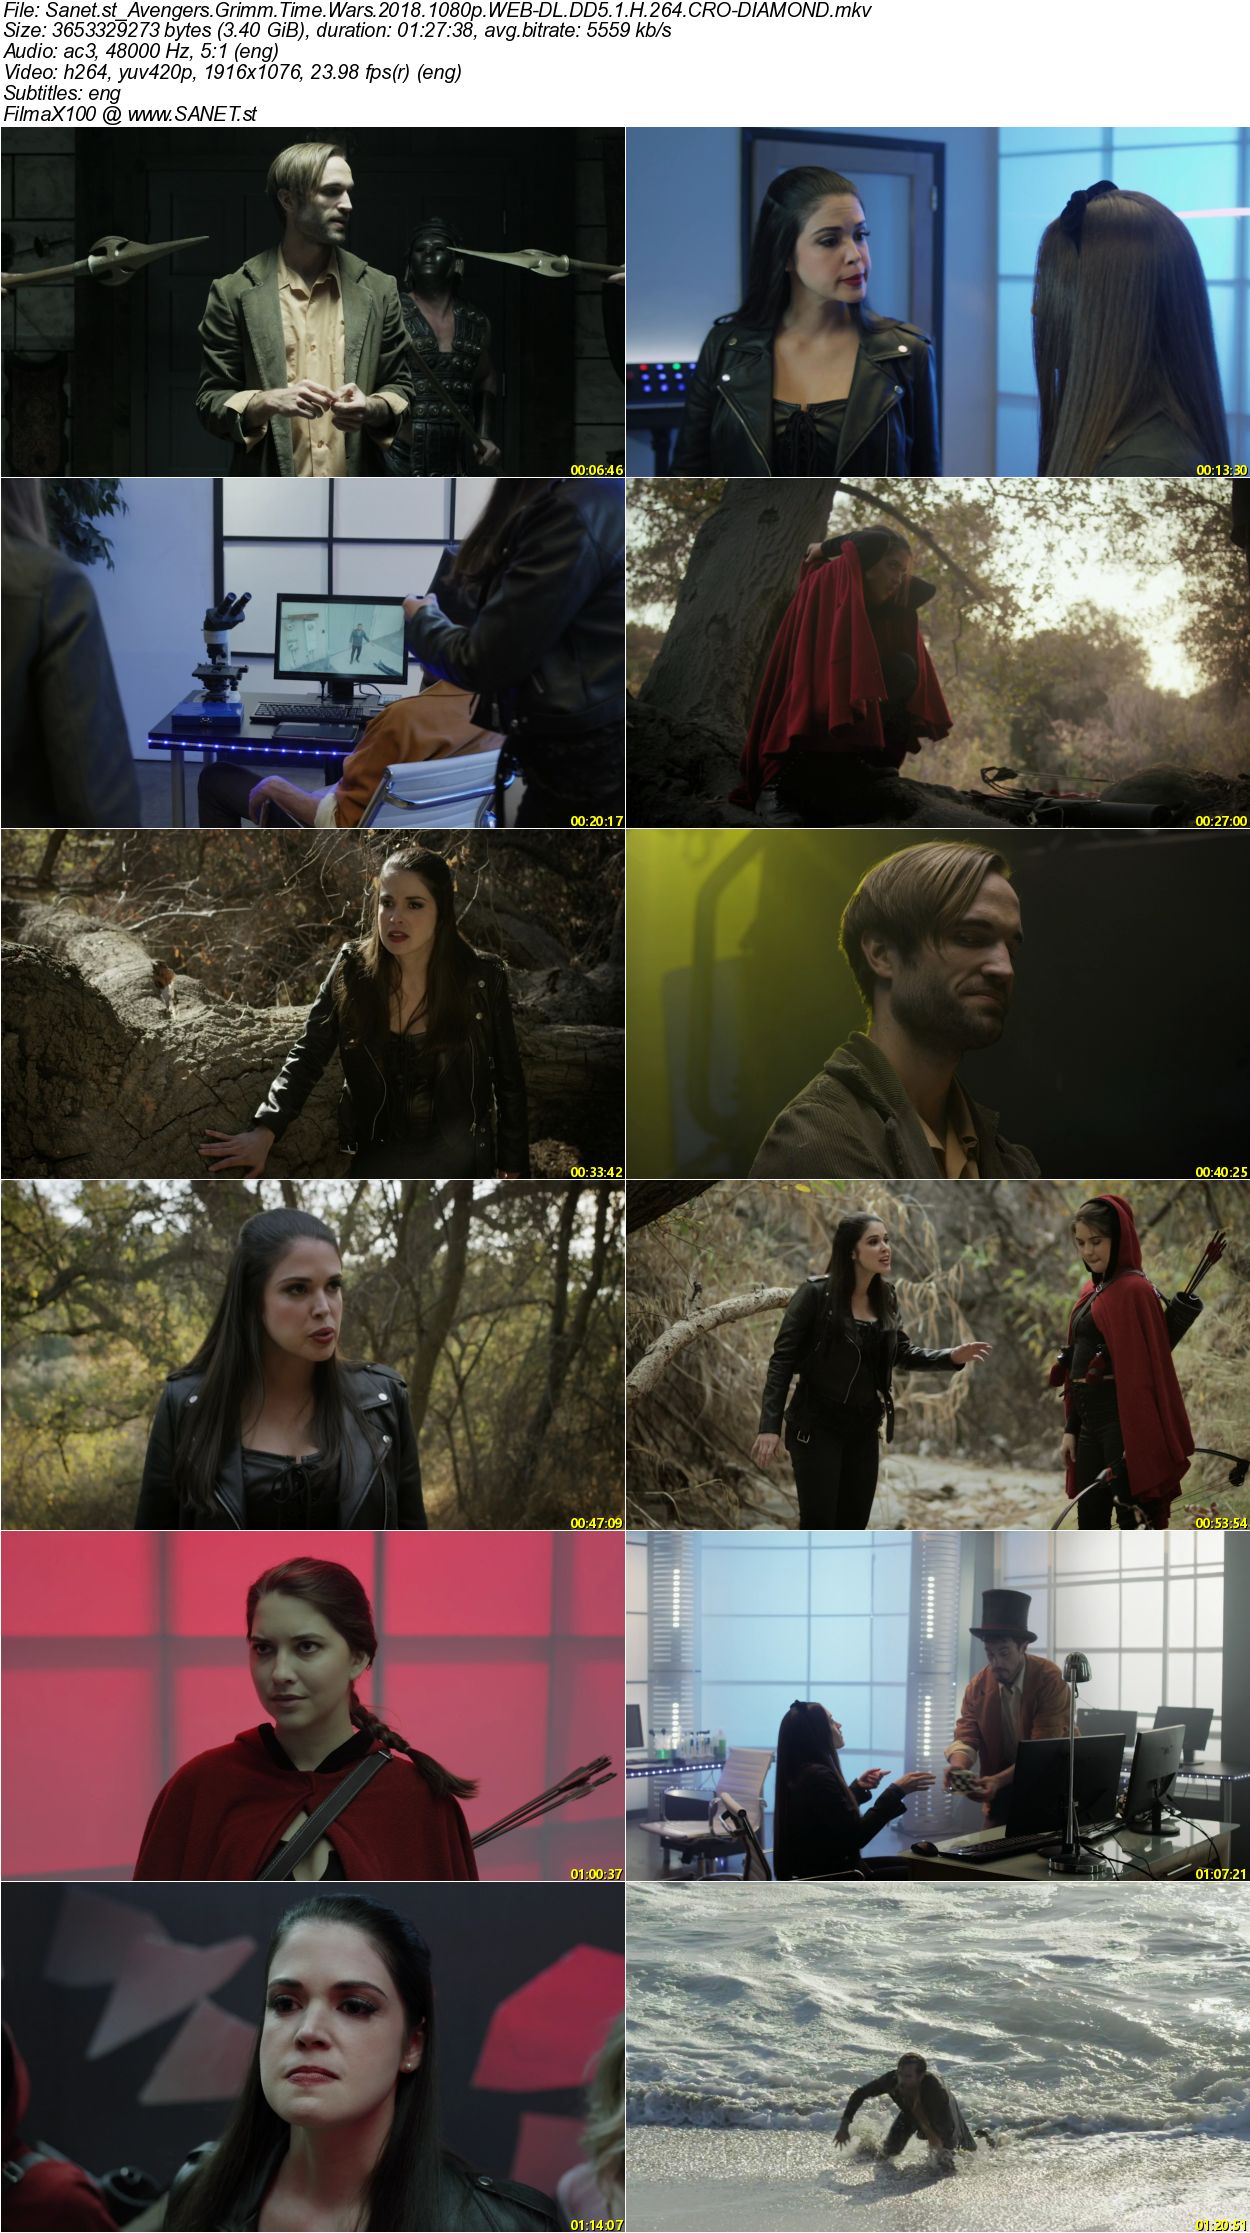 2018 Avengers Grimm: Time Wars